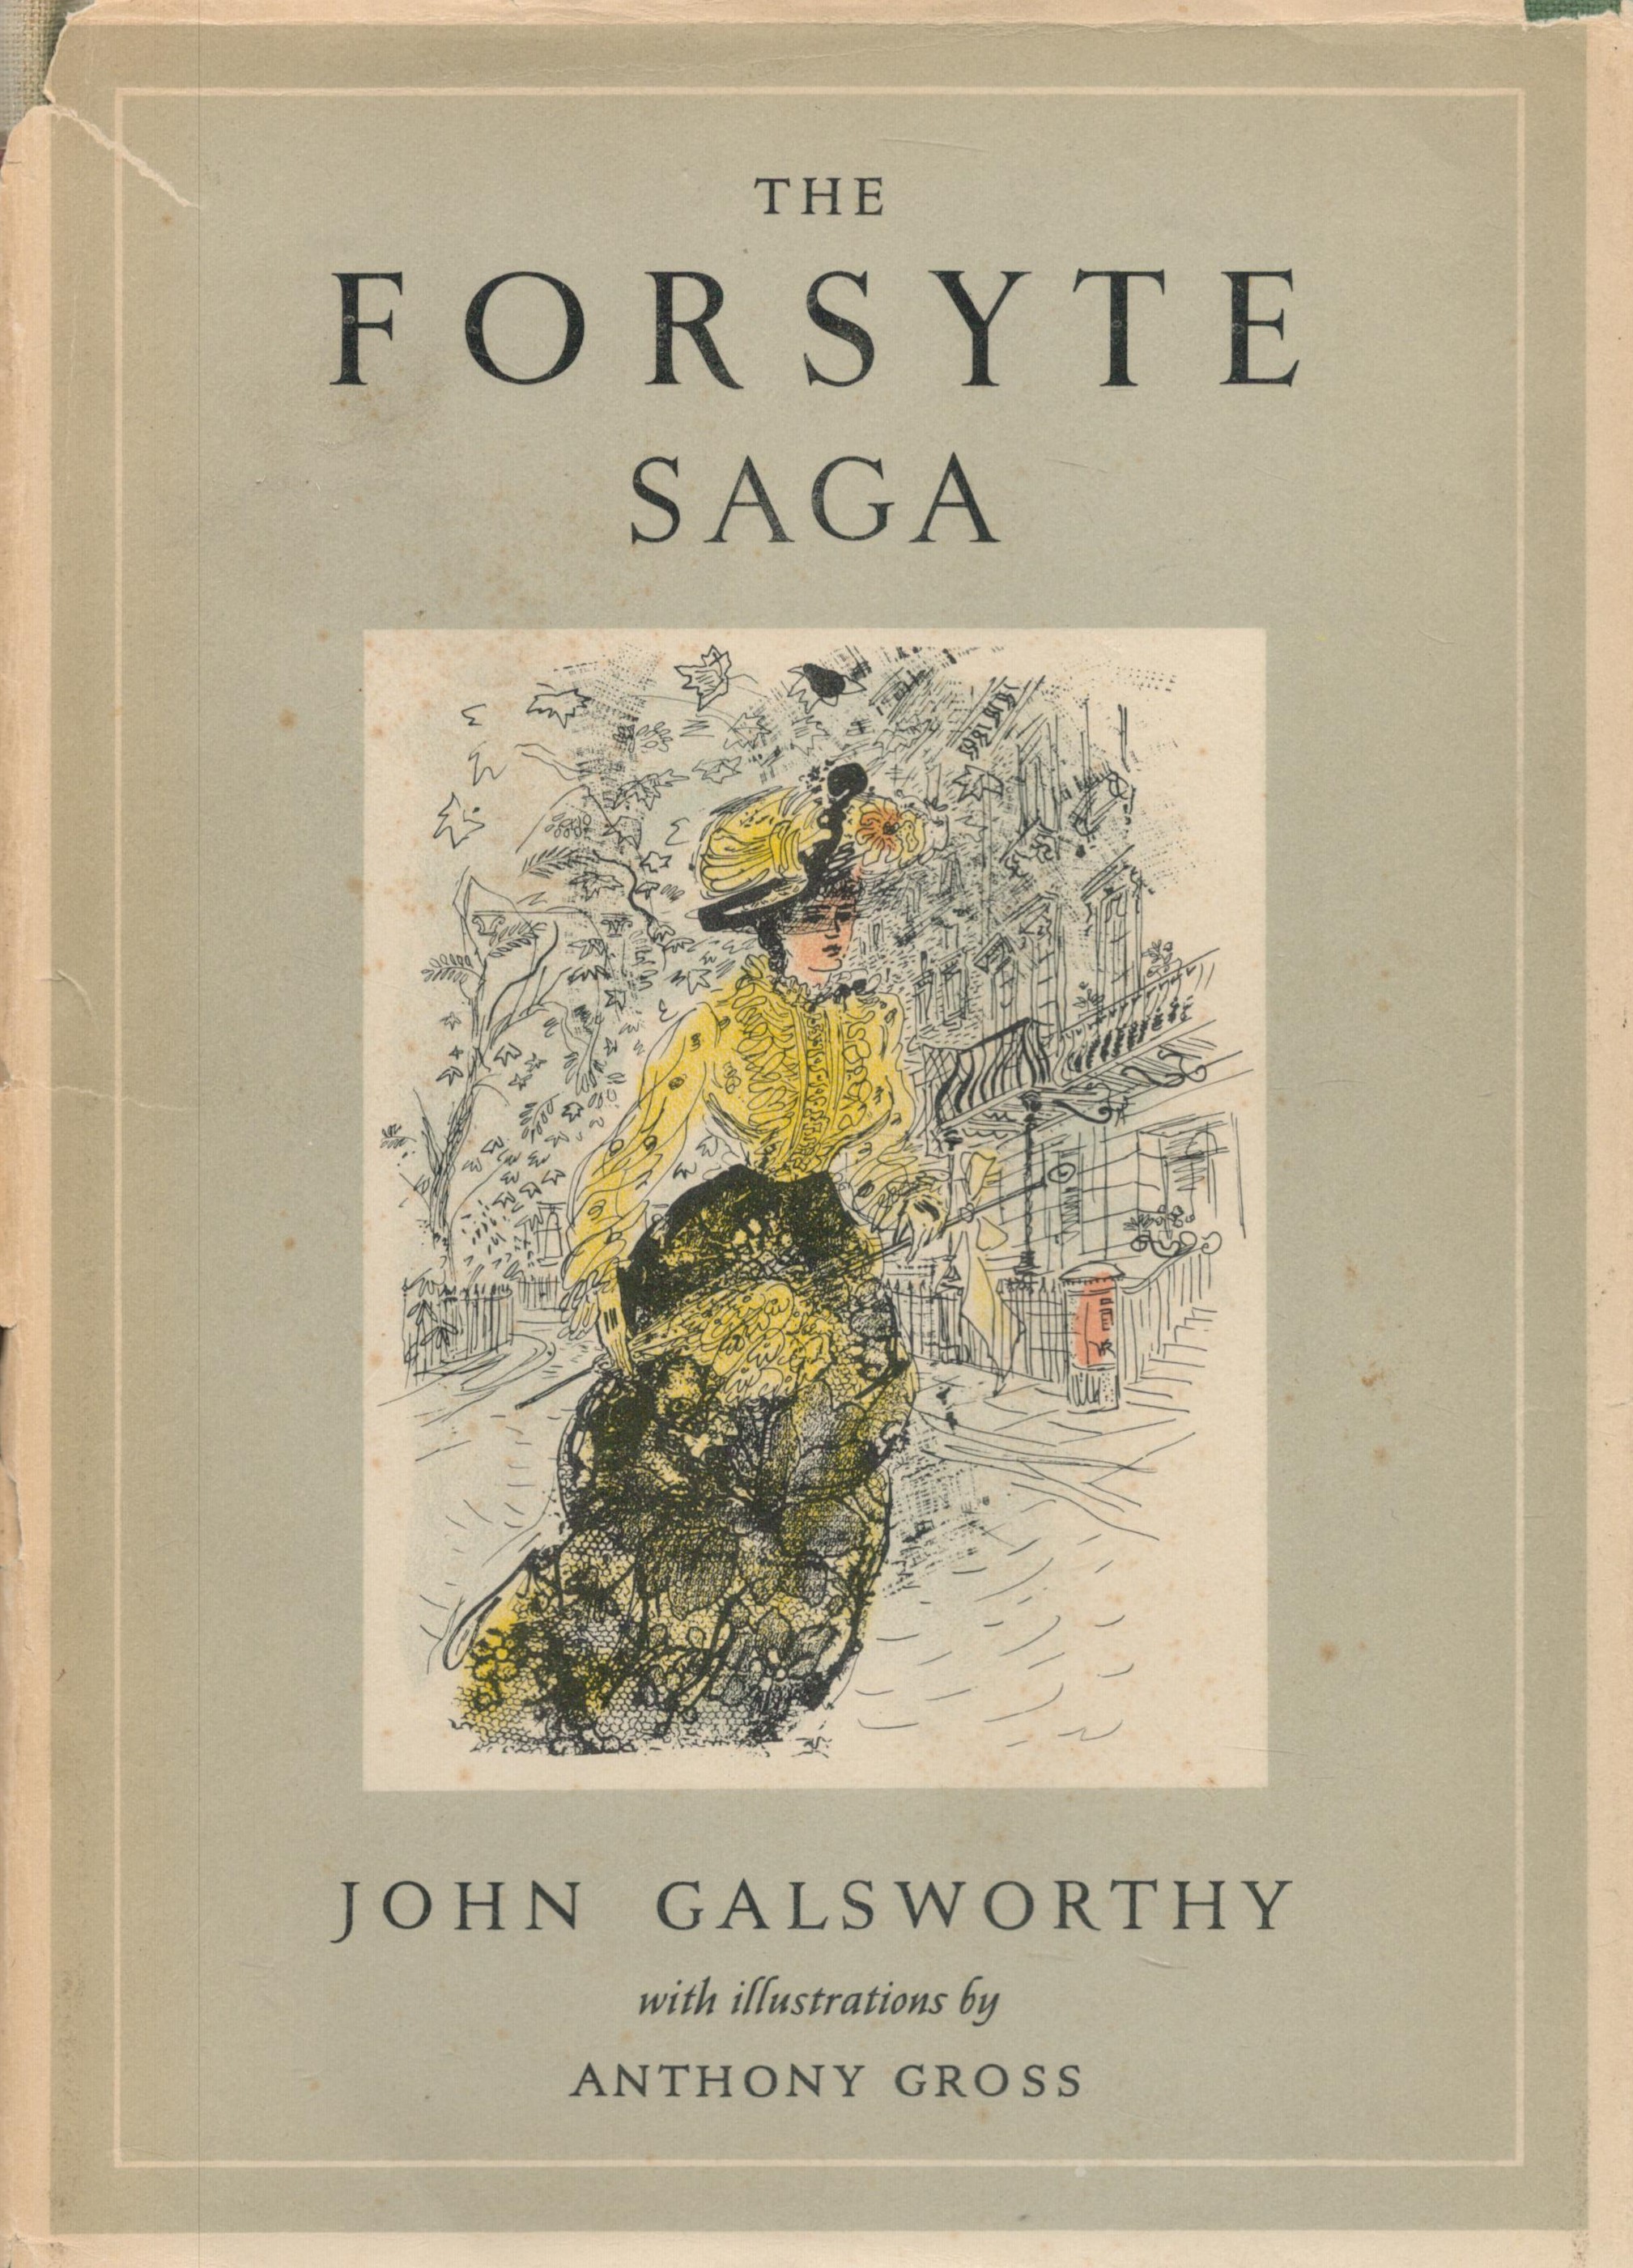 The Forsythe Saga by John Galsworthy 1950 Illustrated Edition Hardback Book with 820 pages published